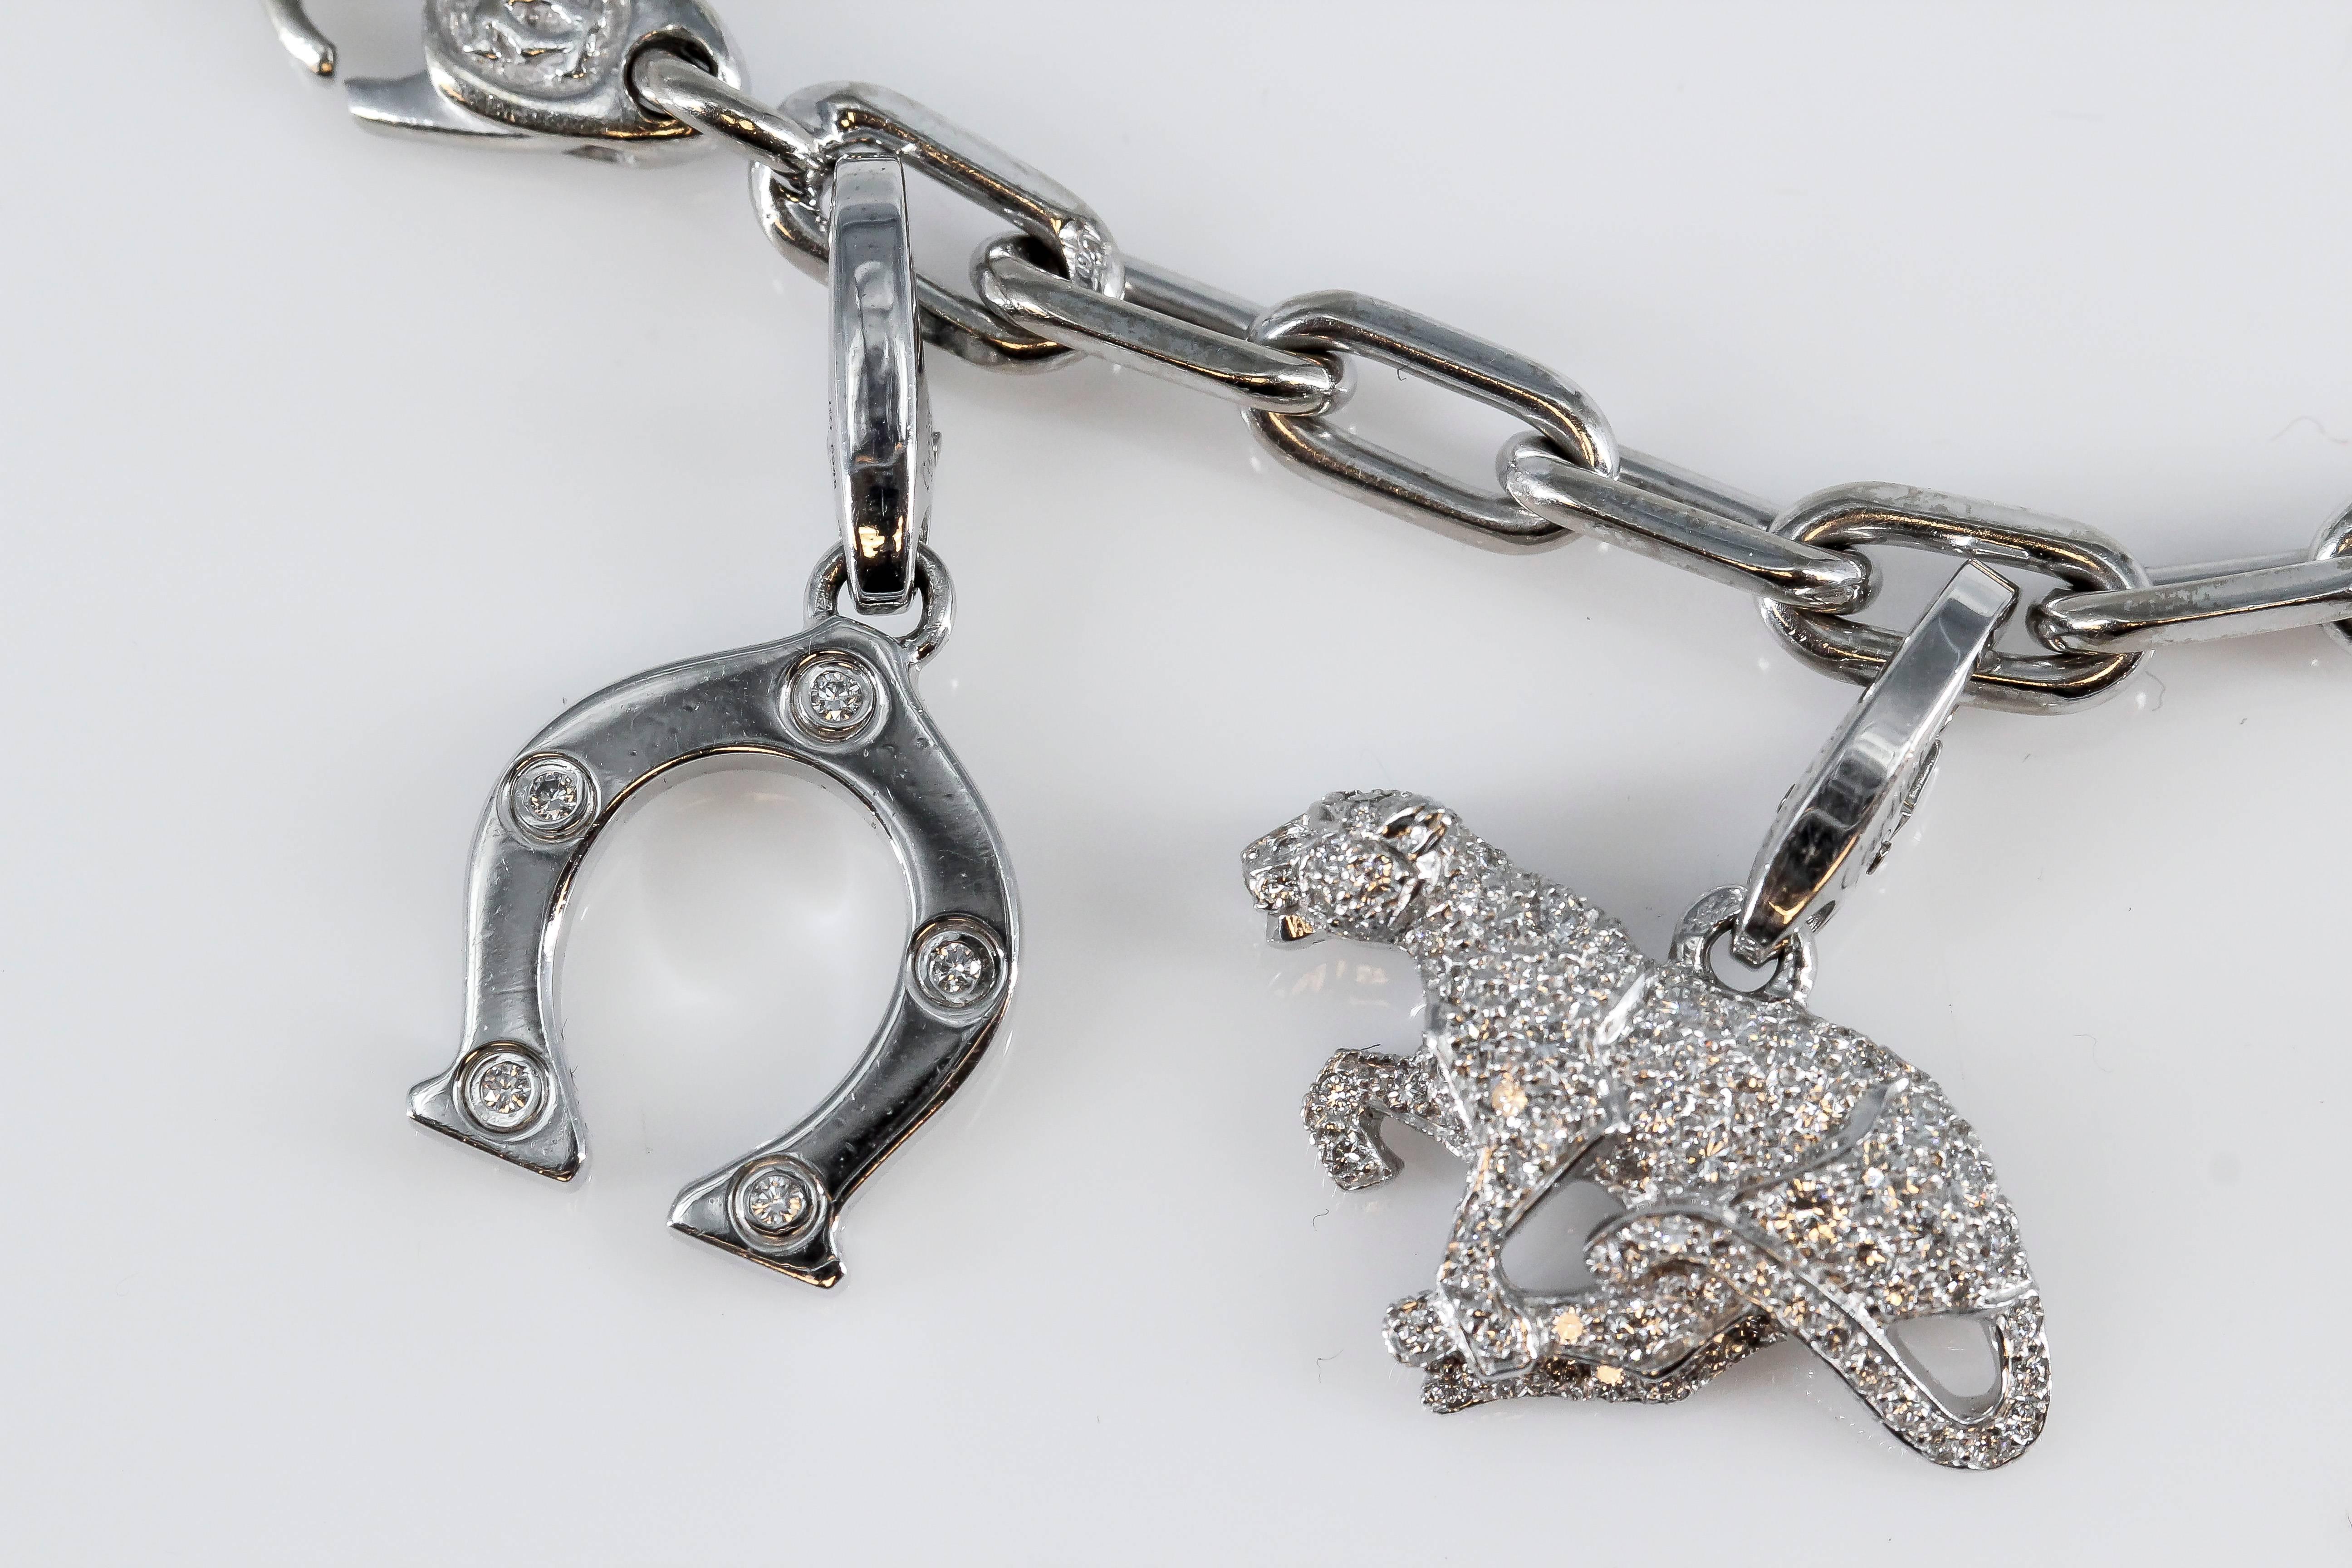 Beautiful diamond and 18K white gold charm bracelet by Cartier. It features 9 charms in total, all diamond set, including: Cartier logo, elephant, love bracelet, revolving "I love you" charm, shamrock, panther, cross, two-tone collapsing